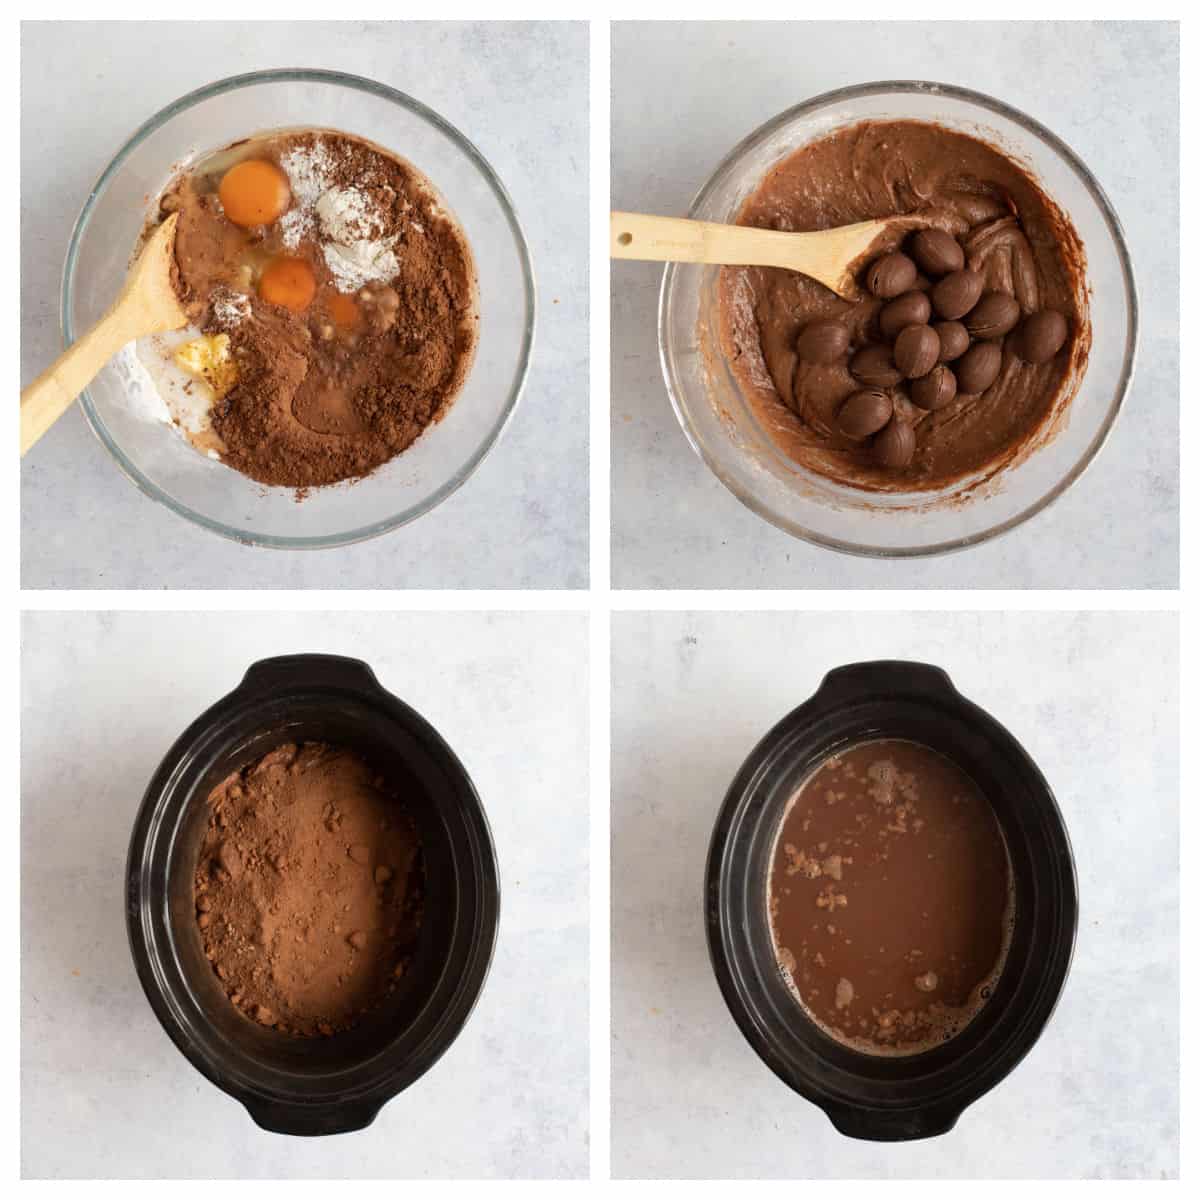 Step by step photo instructions for making slow cooker chocolate pudding.